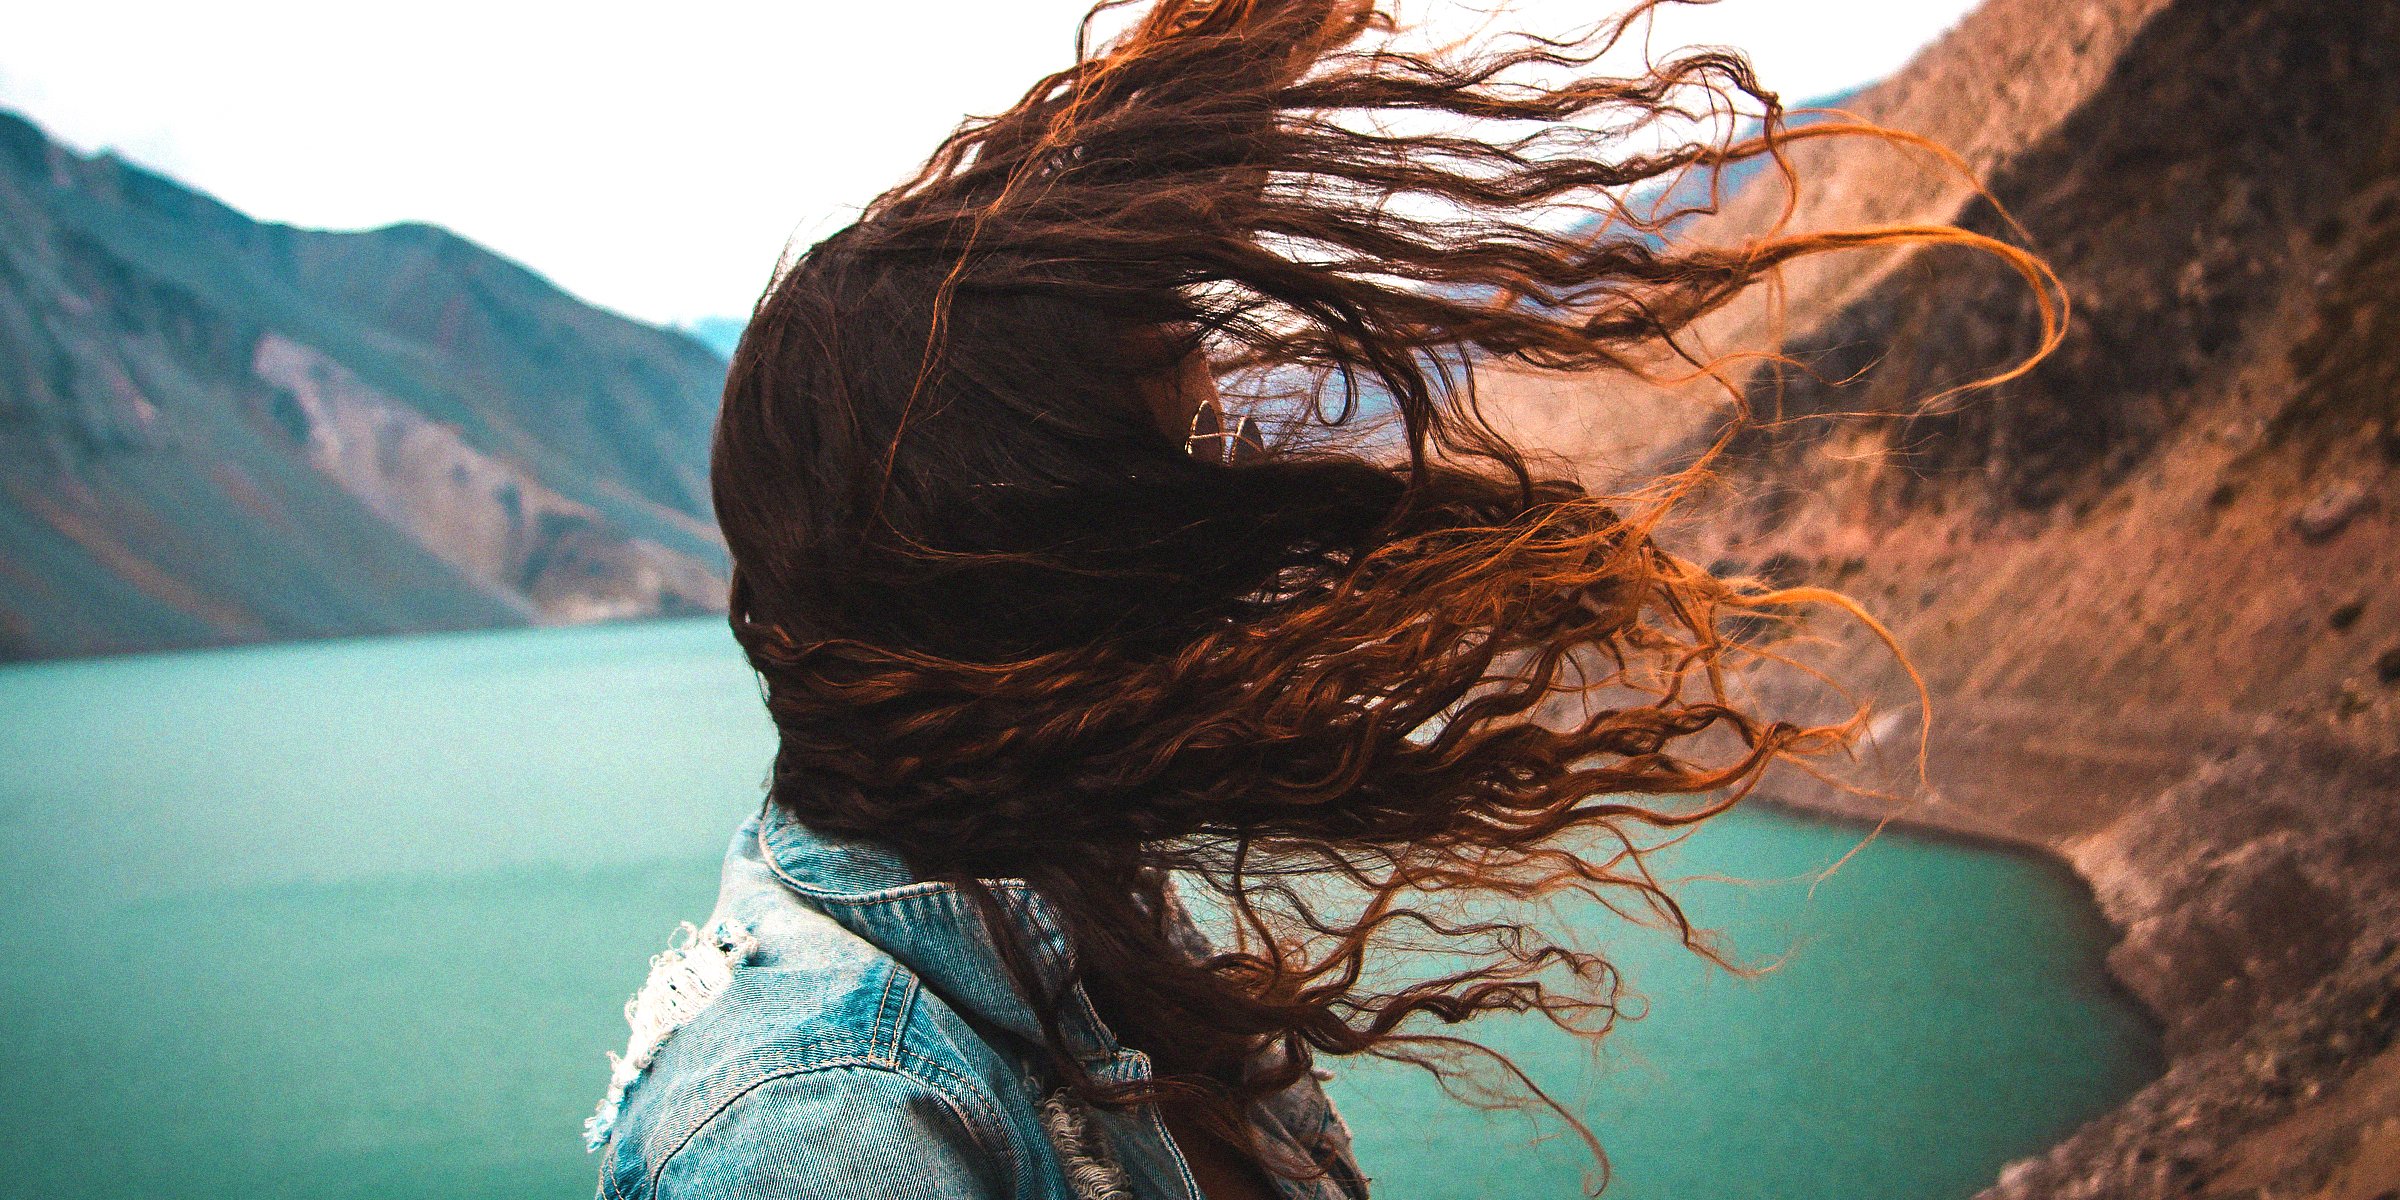 Unsplash | A woman with her red hair blowing in the wind as the stands in front of scenery filled with mountains and a river